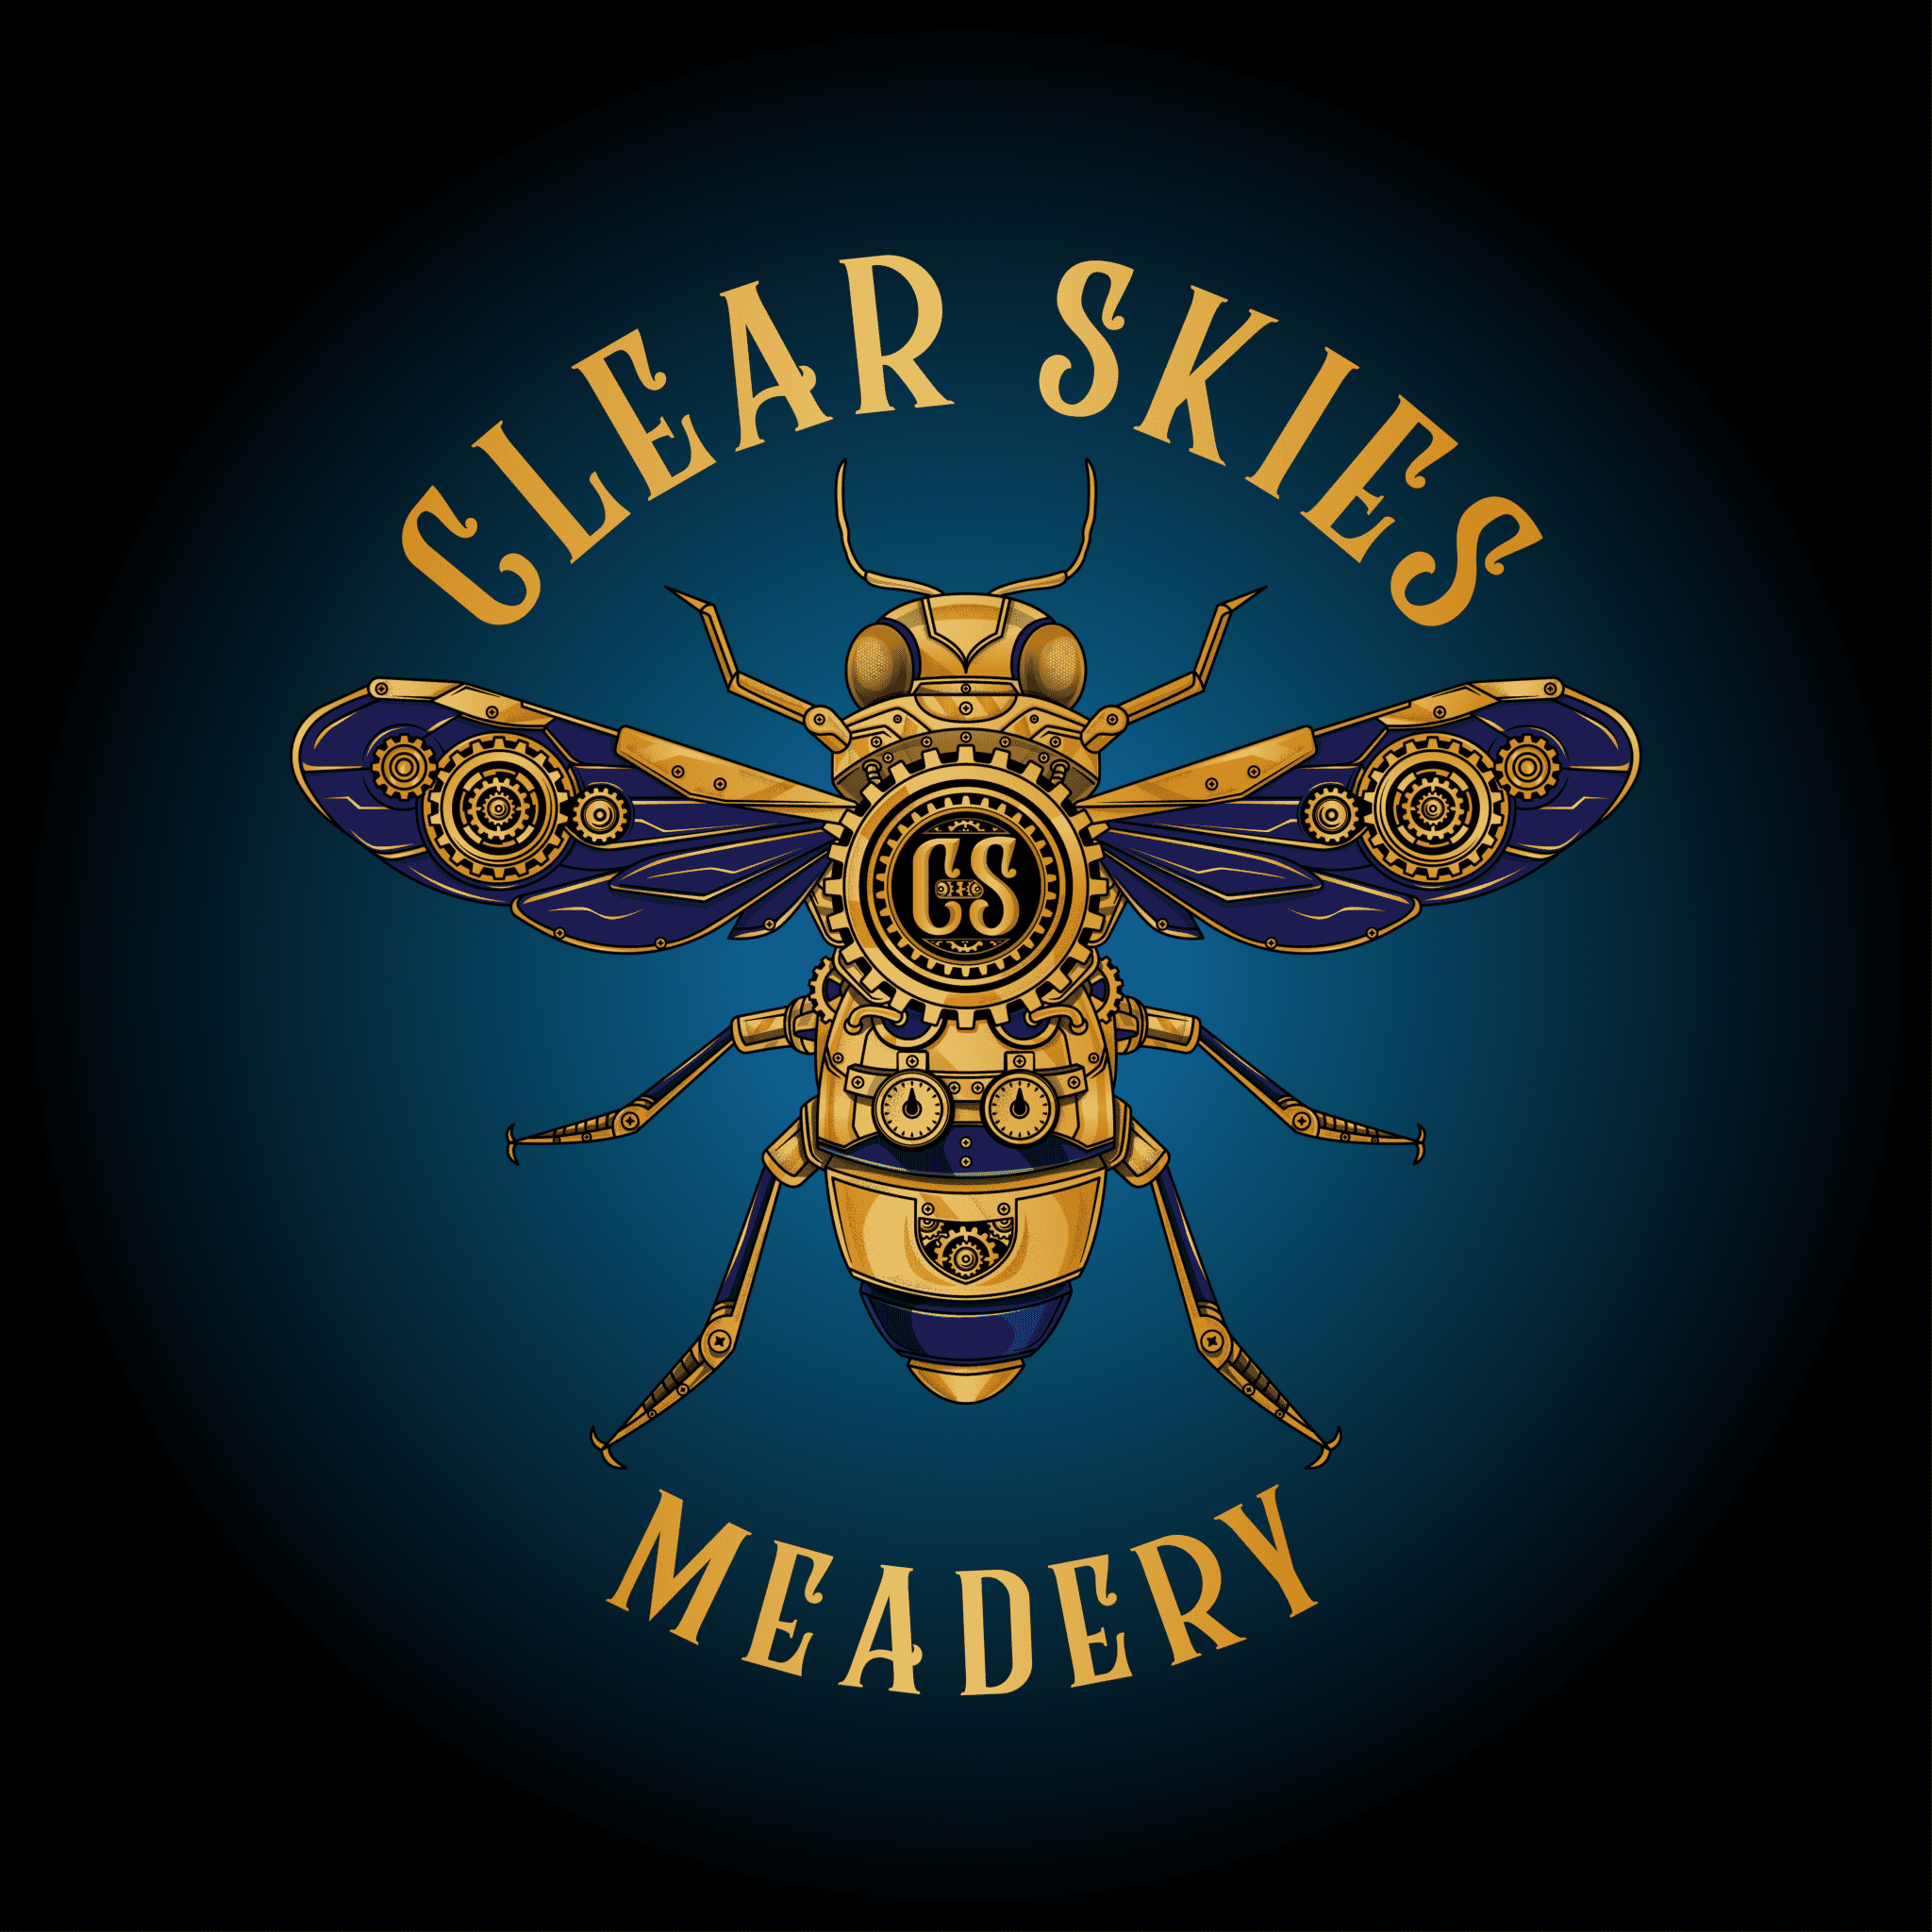 Clear-Skies-Meadery-2048x2048.png